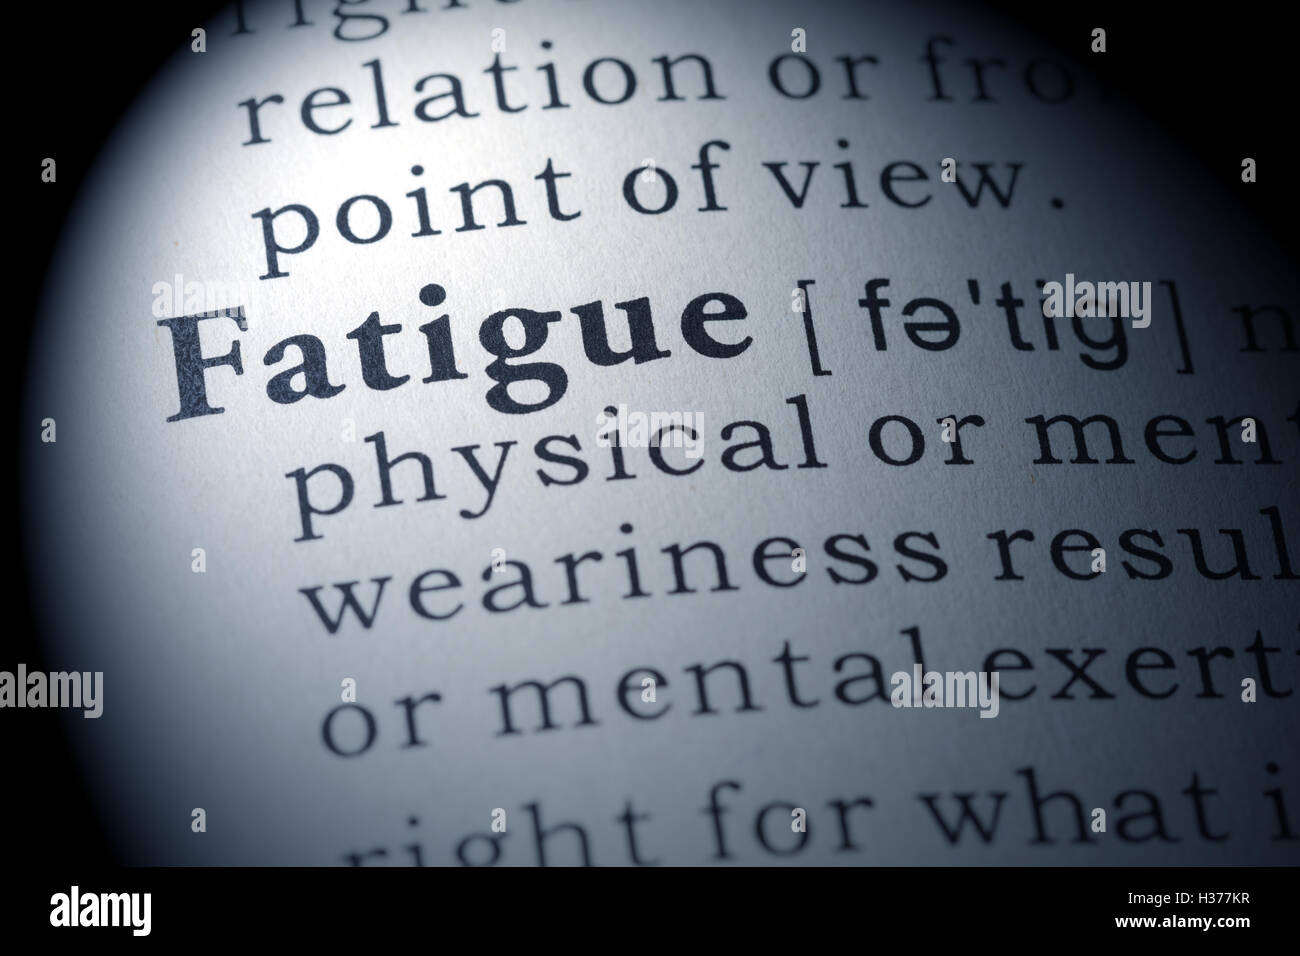 Fake Dictionary, Dictionary definition of the word fatigue. Stock Photo